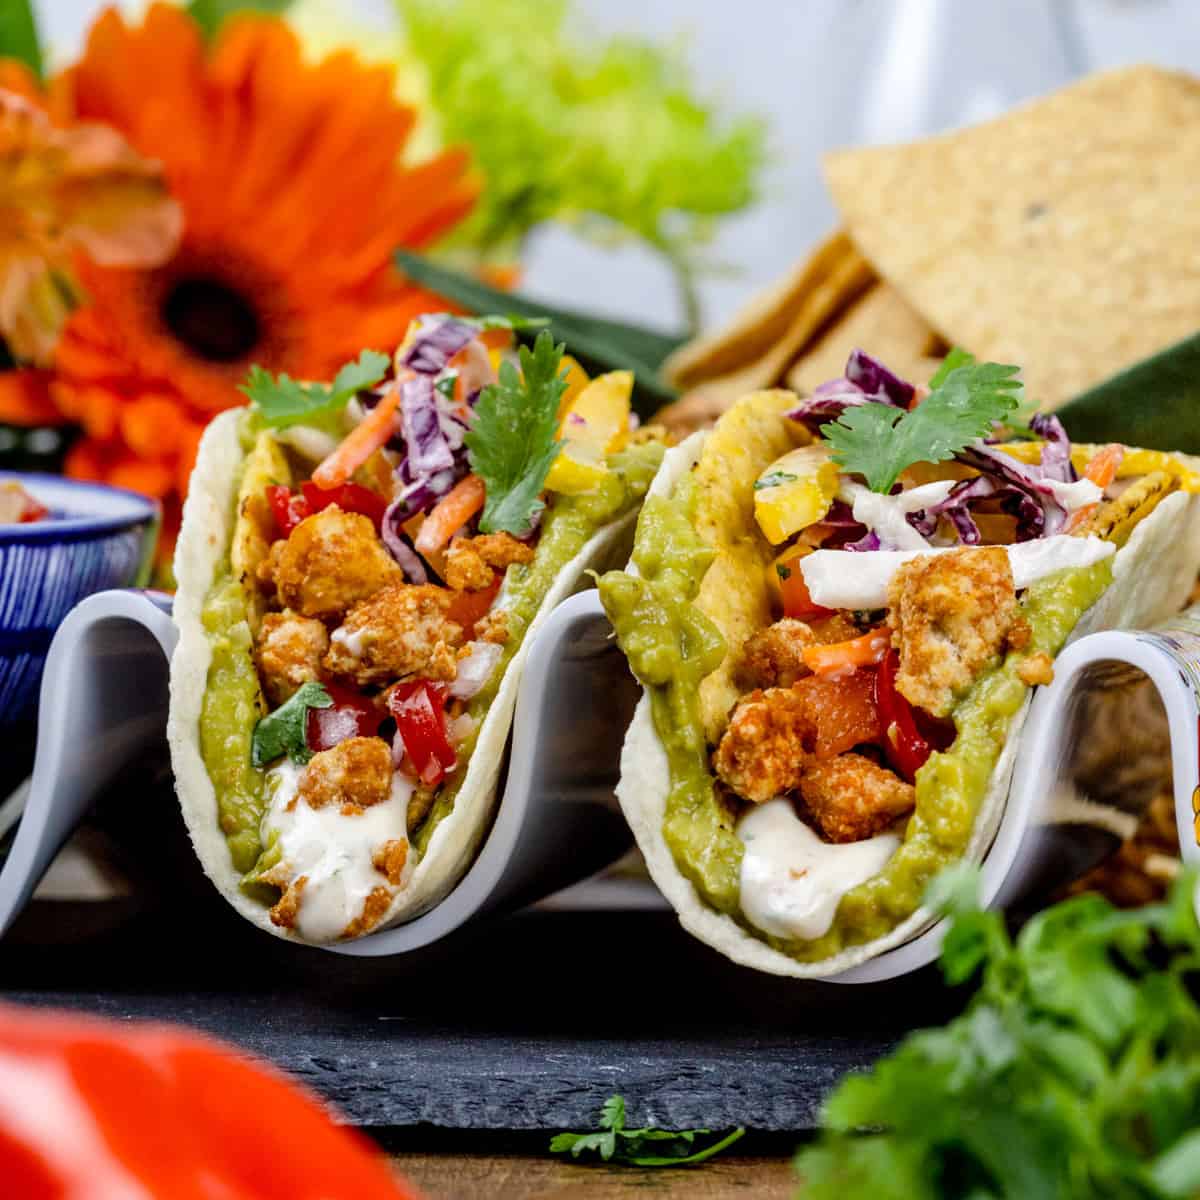 Closeup of two tofu tacos in a taco stand in both crunchy and soft shells. Toppings like guacamole, salsa, and sour cream are on top. Fresh ingredients like peppers, cilantro, and fresh flowers are surrounding the tacos.